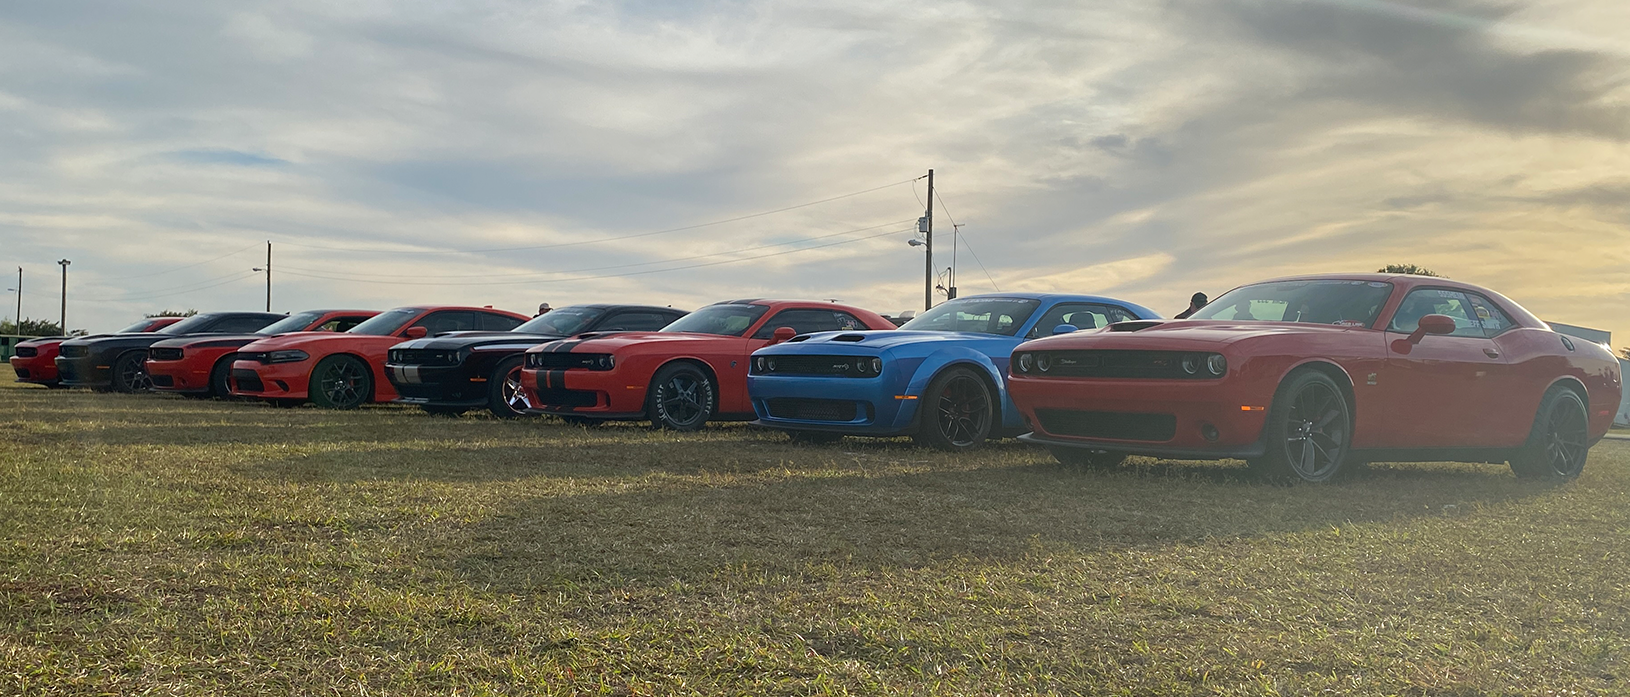 dodge vehicles lined up at sunset